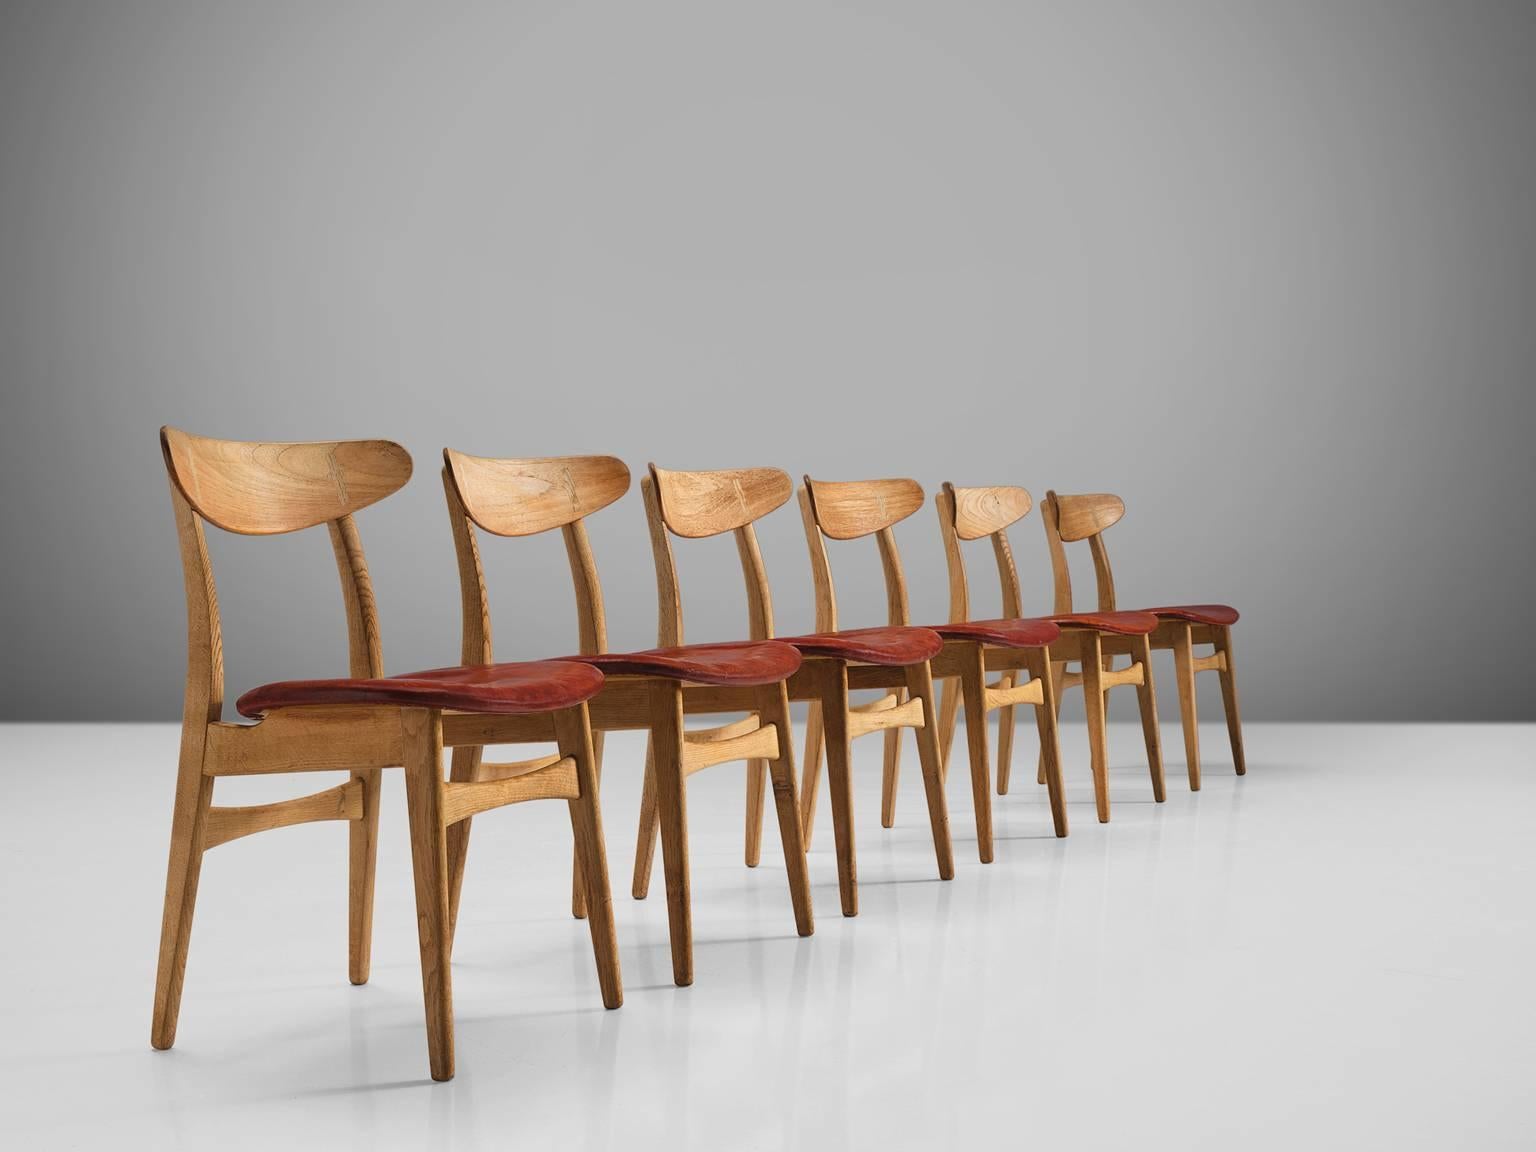 Hans J. Wegner for Carl Hansen & Søn, set of six 'CH 30' dining chairs, oak, teak, leather, 1954, Denmark.

This set of six dining chairs is upholstered with deep red leather that has patinated over time. The frame is made of oak whereas the back is